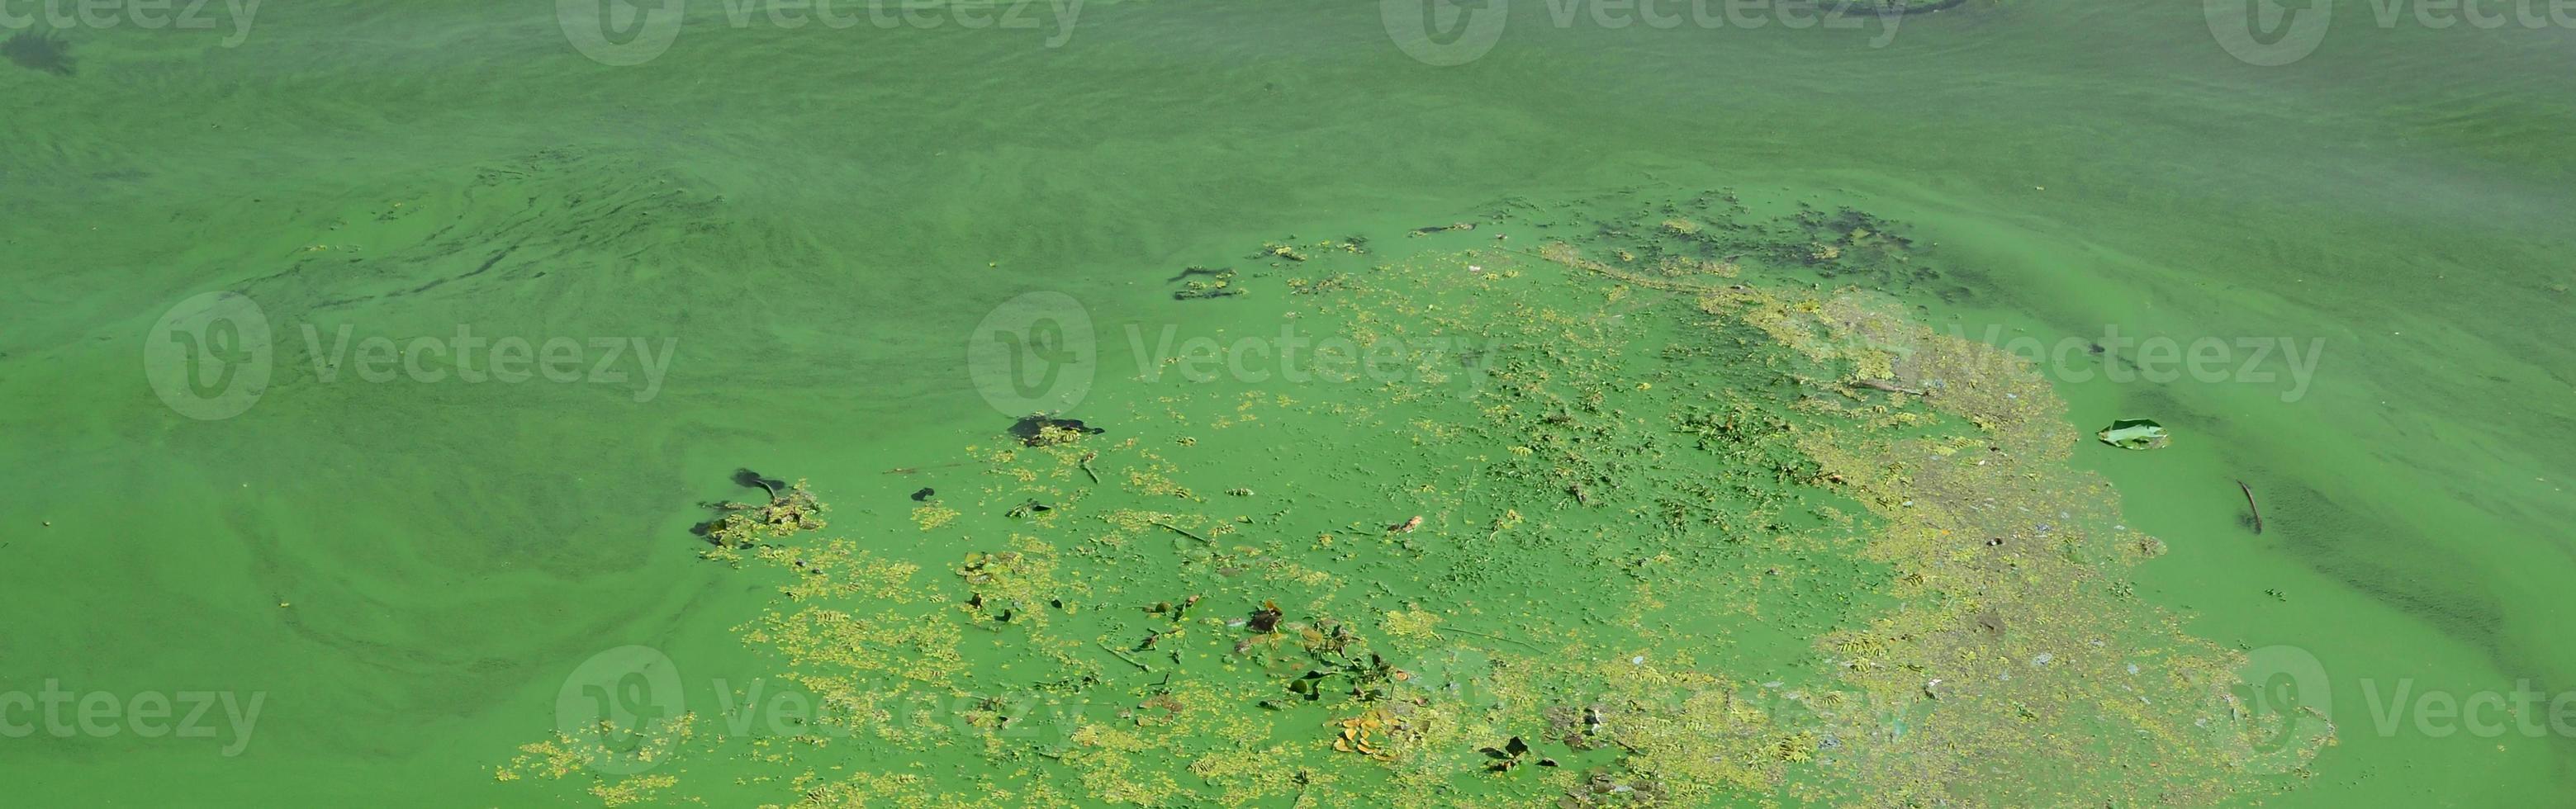 The surface of an old swamp covered with duckweed and lily leaves photo